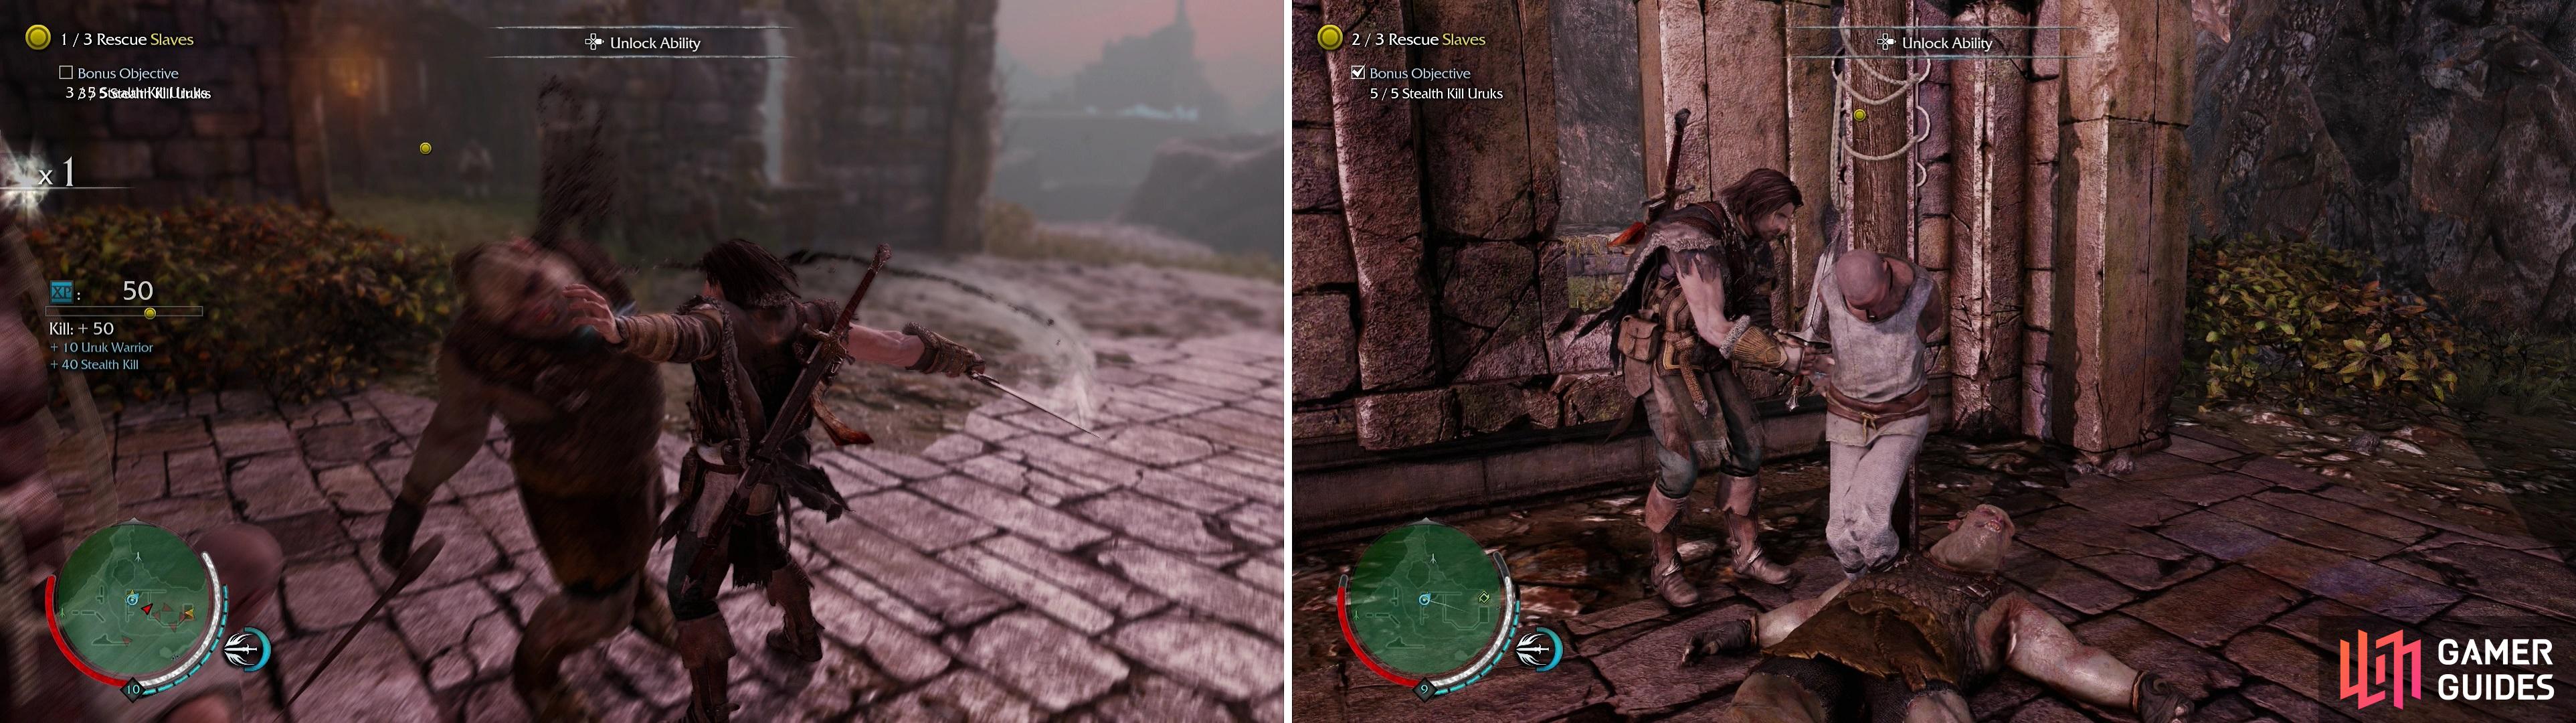 Stealth Kill five Uruks to complete the bonus objective for this Outcast mission (left), then free the Slaves (right).